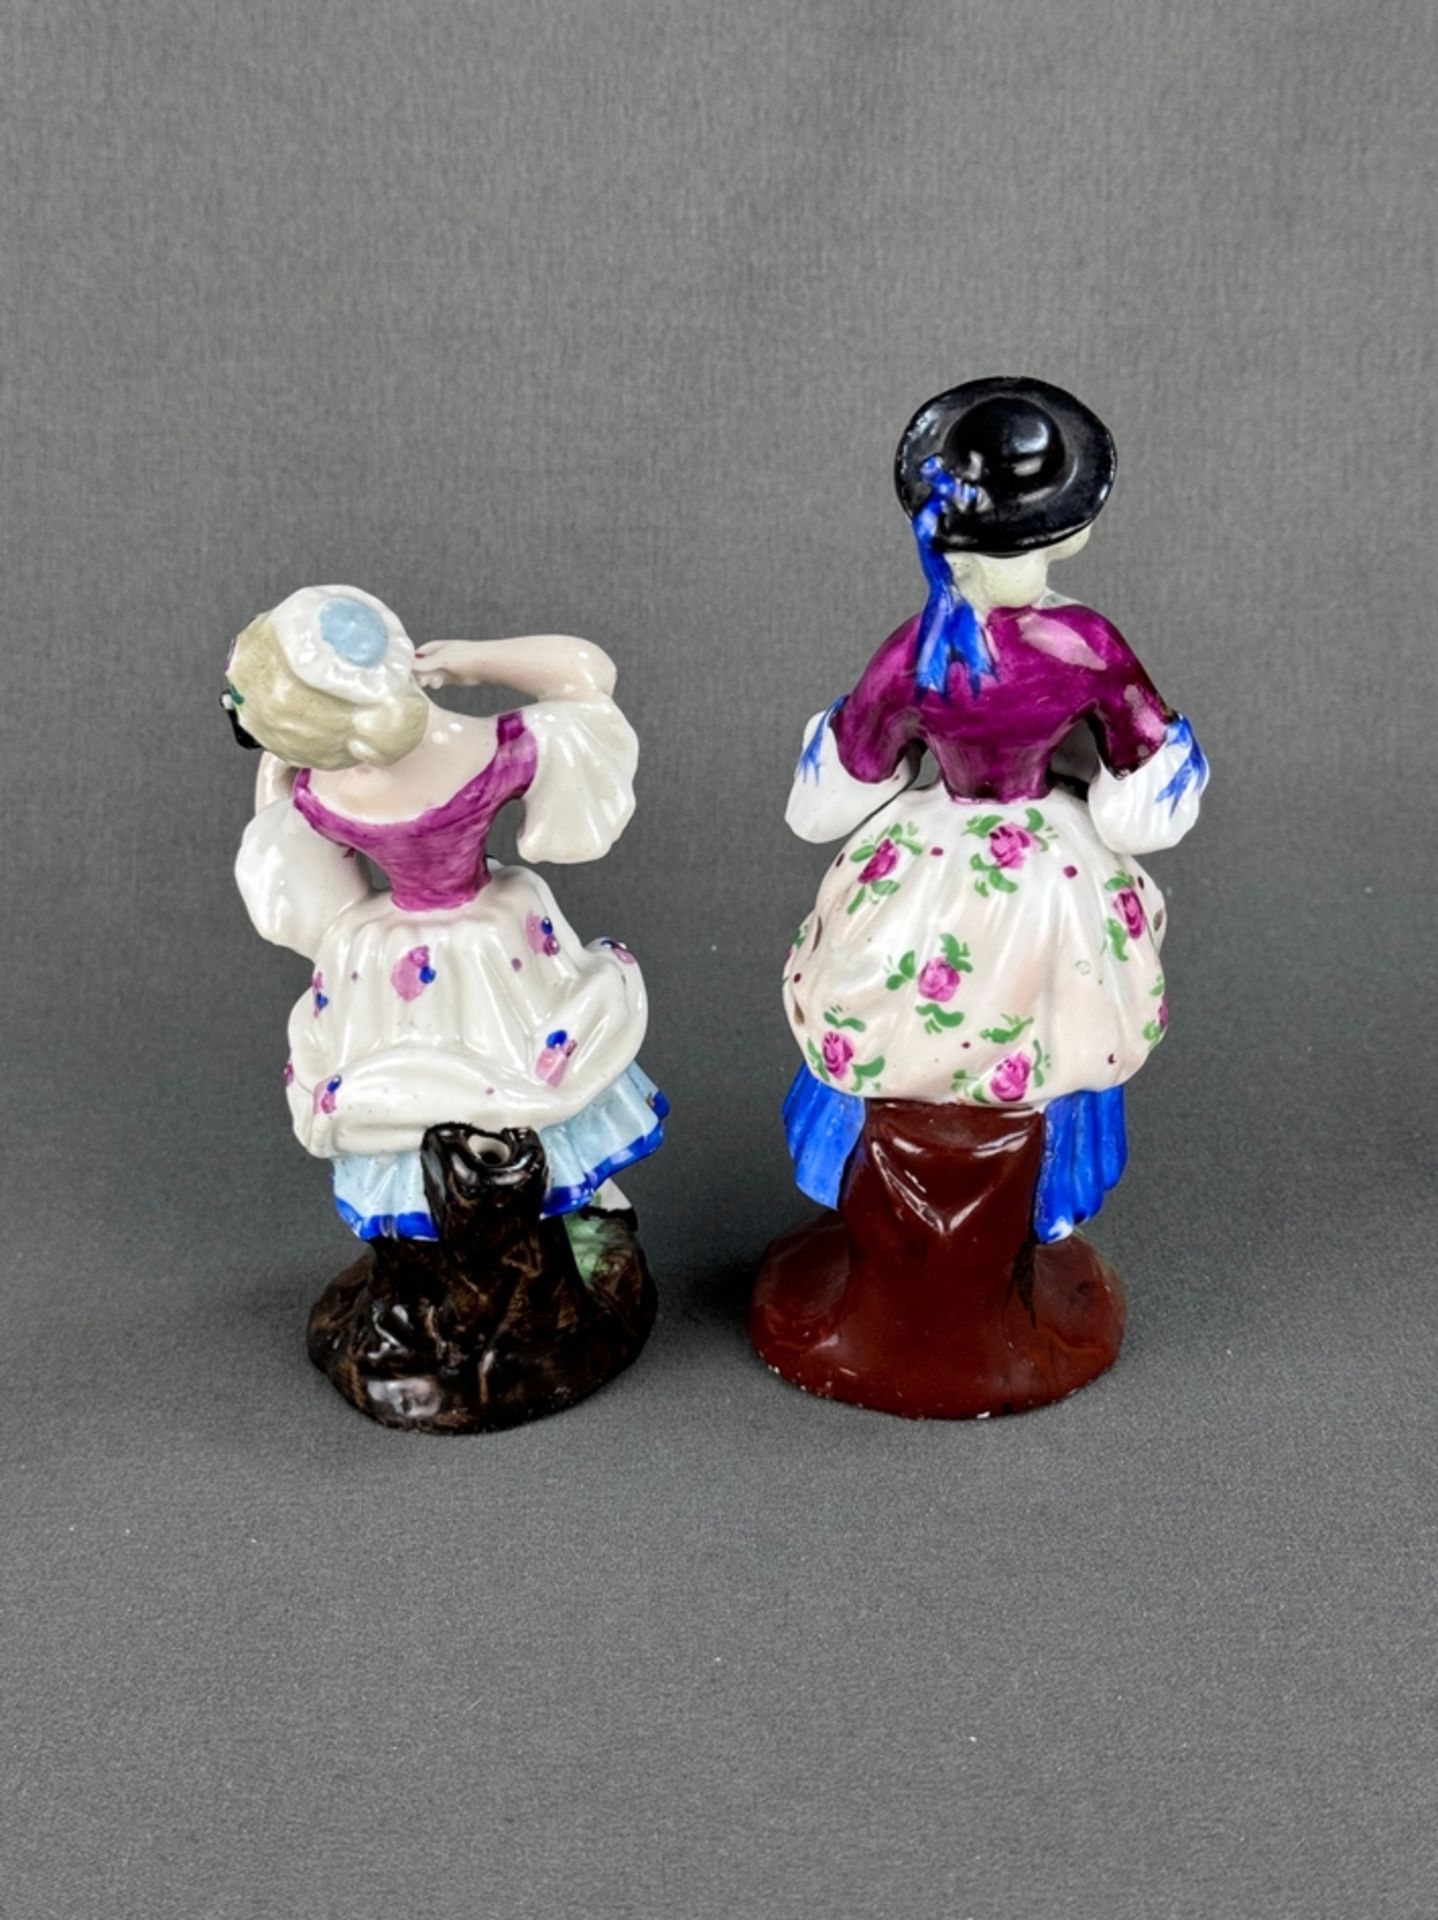 Two porcelain figurines "Woman with mirror" and "Woman with basket of flowers", polychrome hand-pai - Image 2 of 2